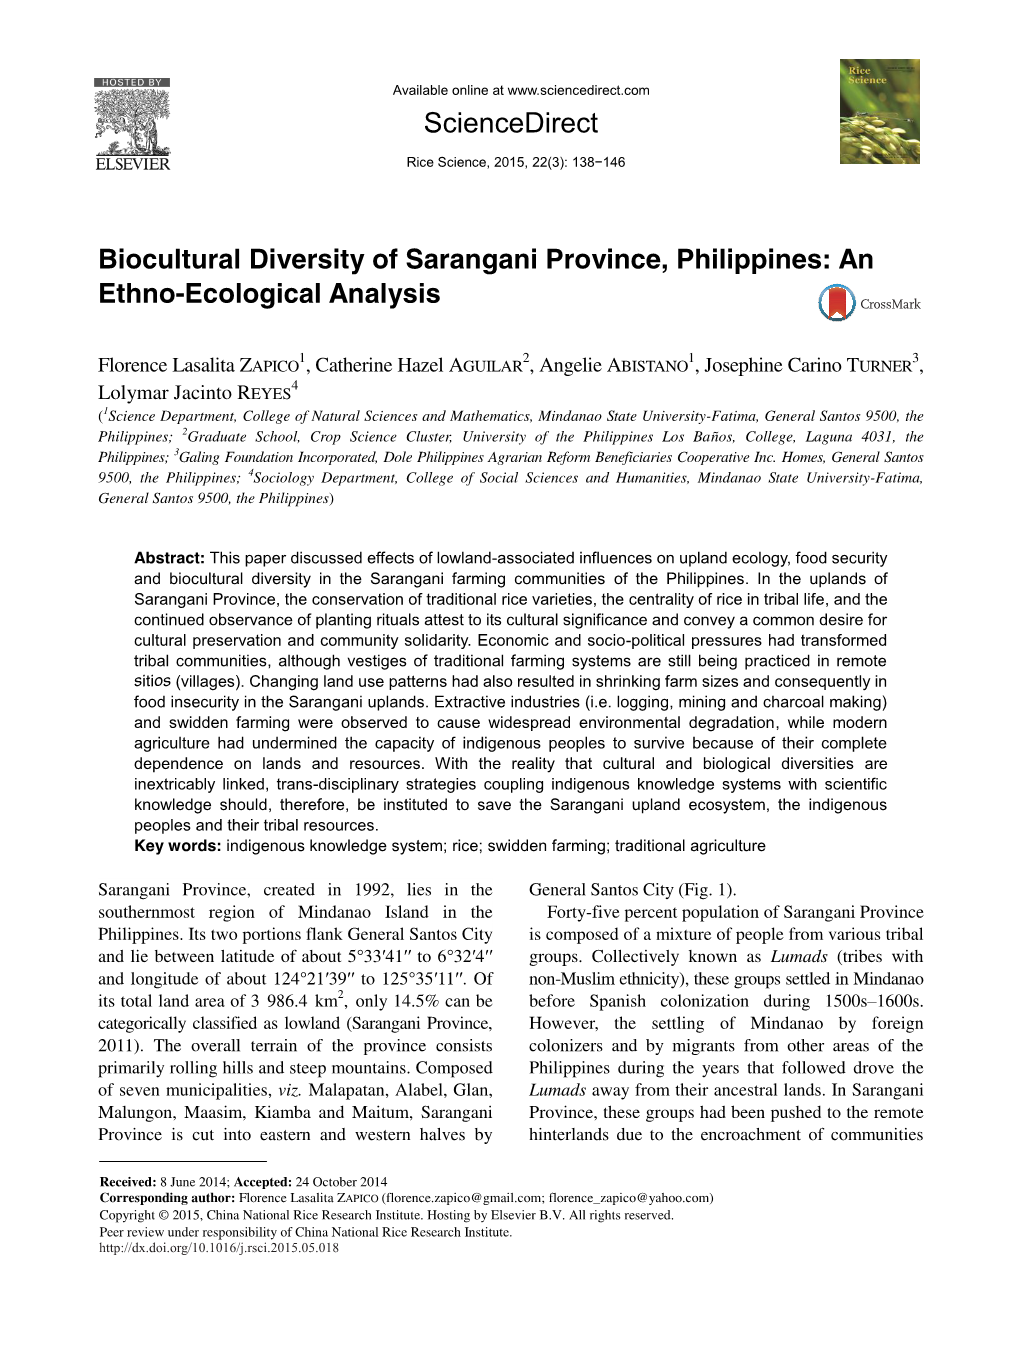 Biocultural Diversity of Sarangani Province, Philippines: an Ethno-Ecological Analysis